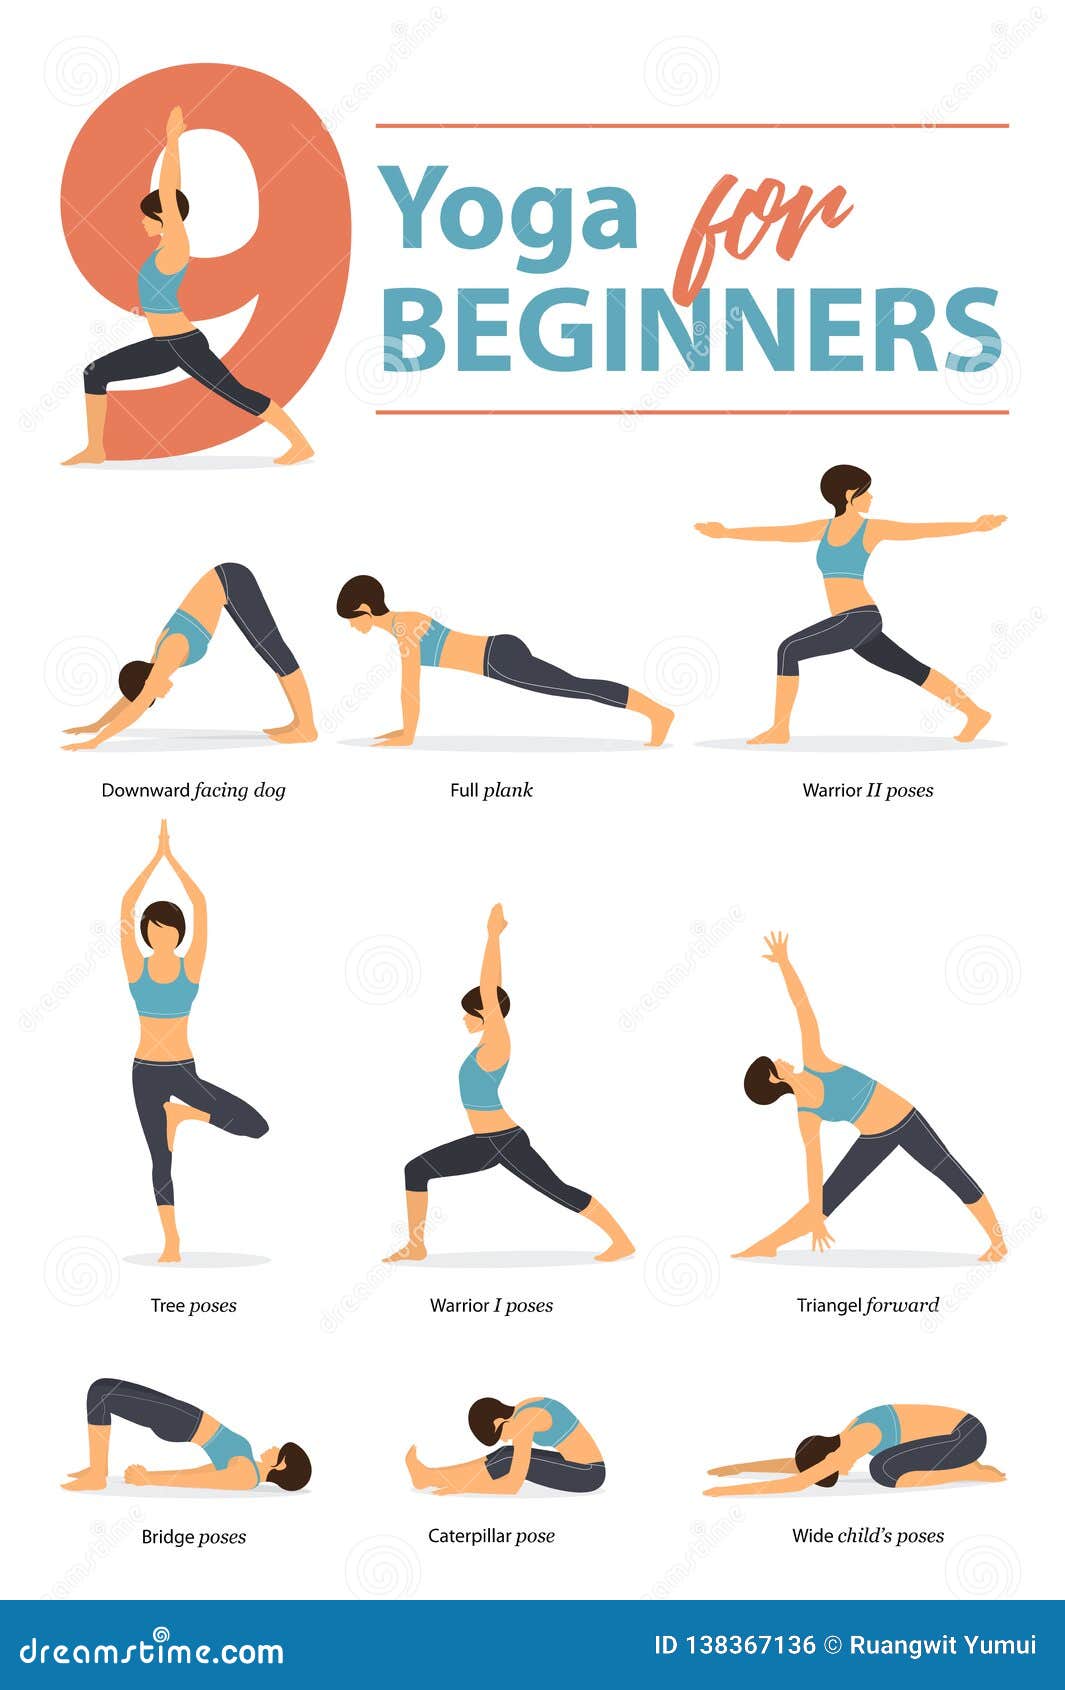 Set of Yoga Postures Female Figures Infographic 9 Yoga Poses for